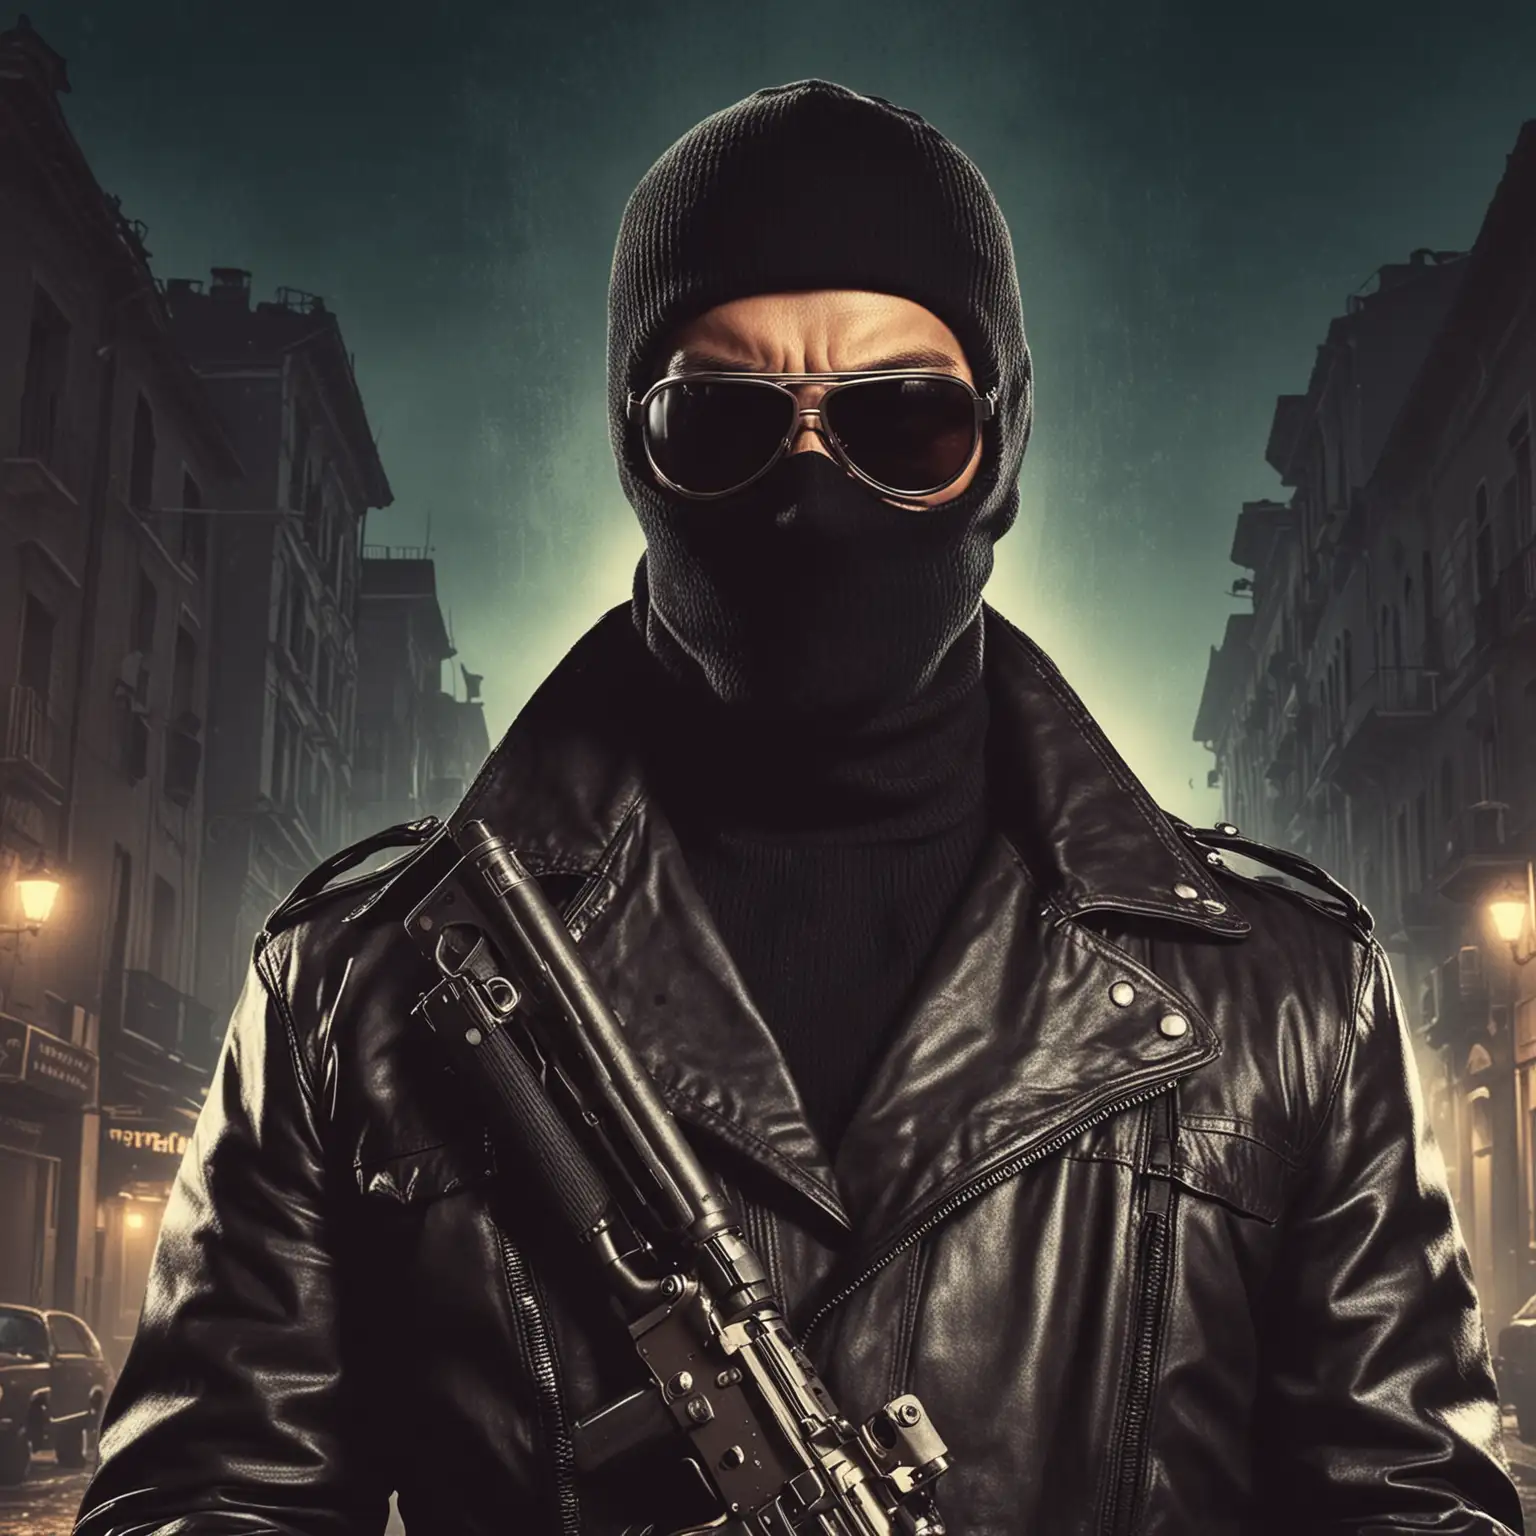 private detective with balaclava , angry face, sunglasses and leather jacket, assault rifle, vintage Italian movie poster style, dark city at night
